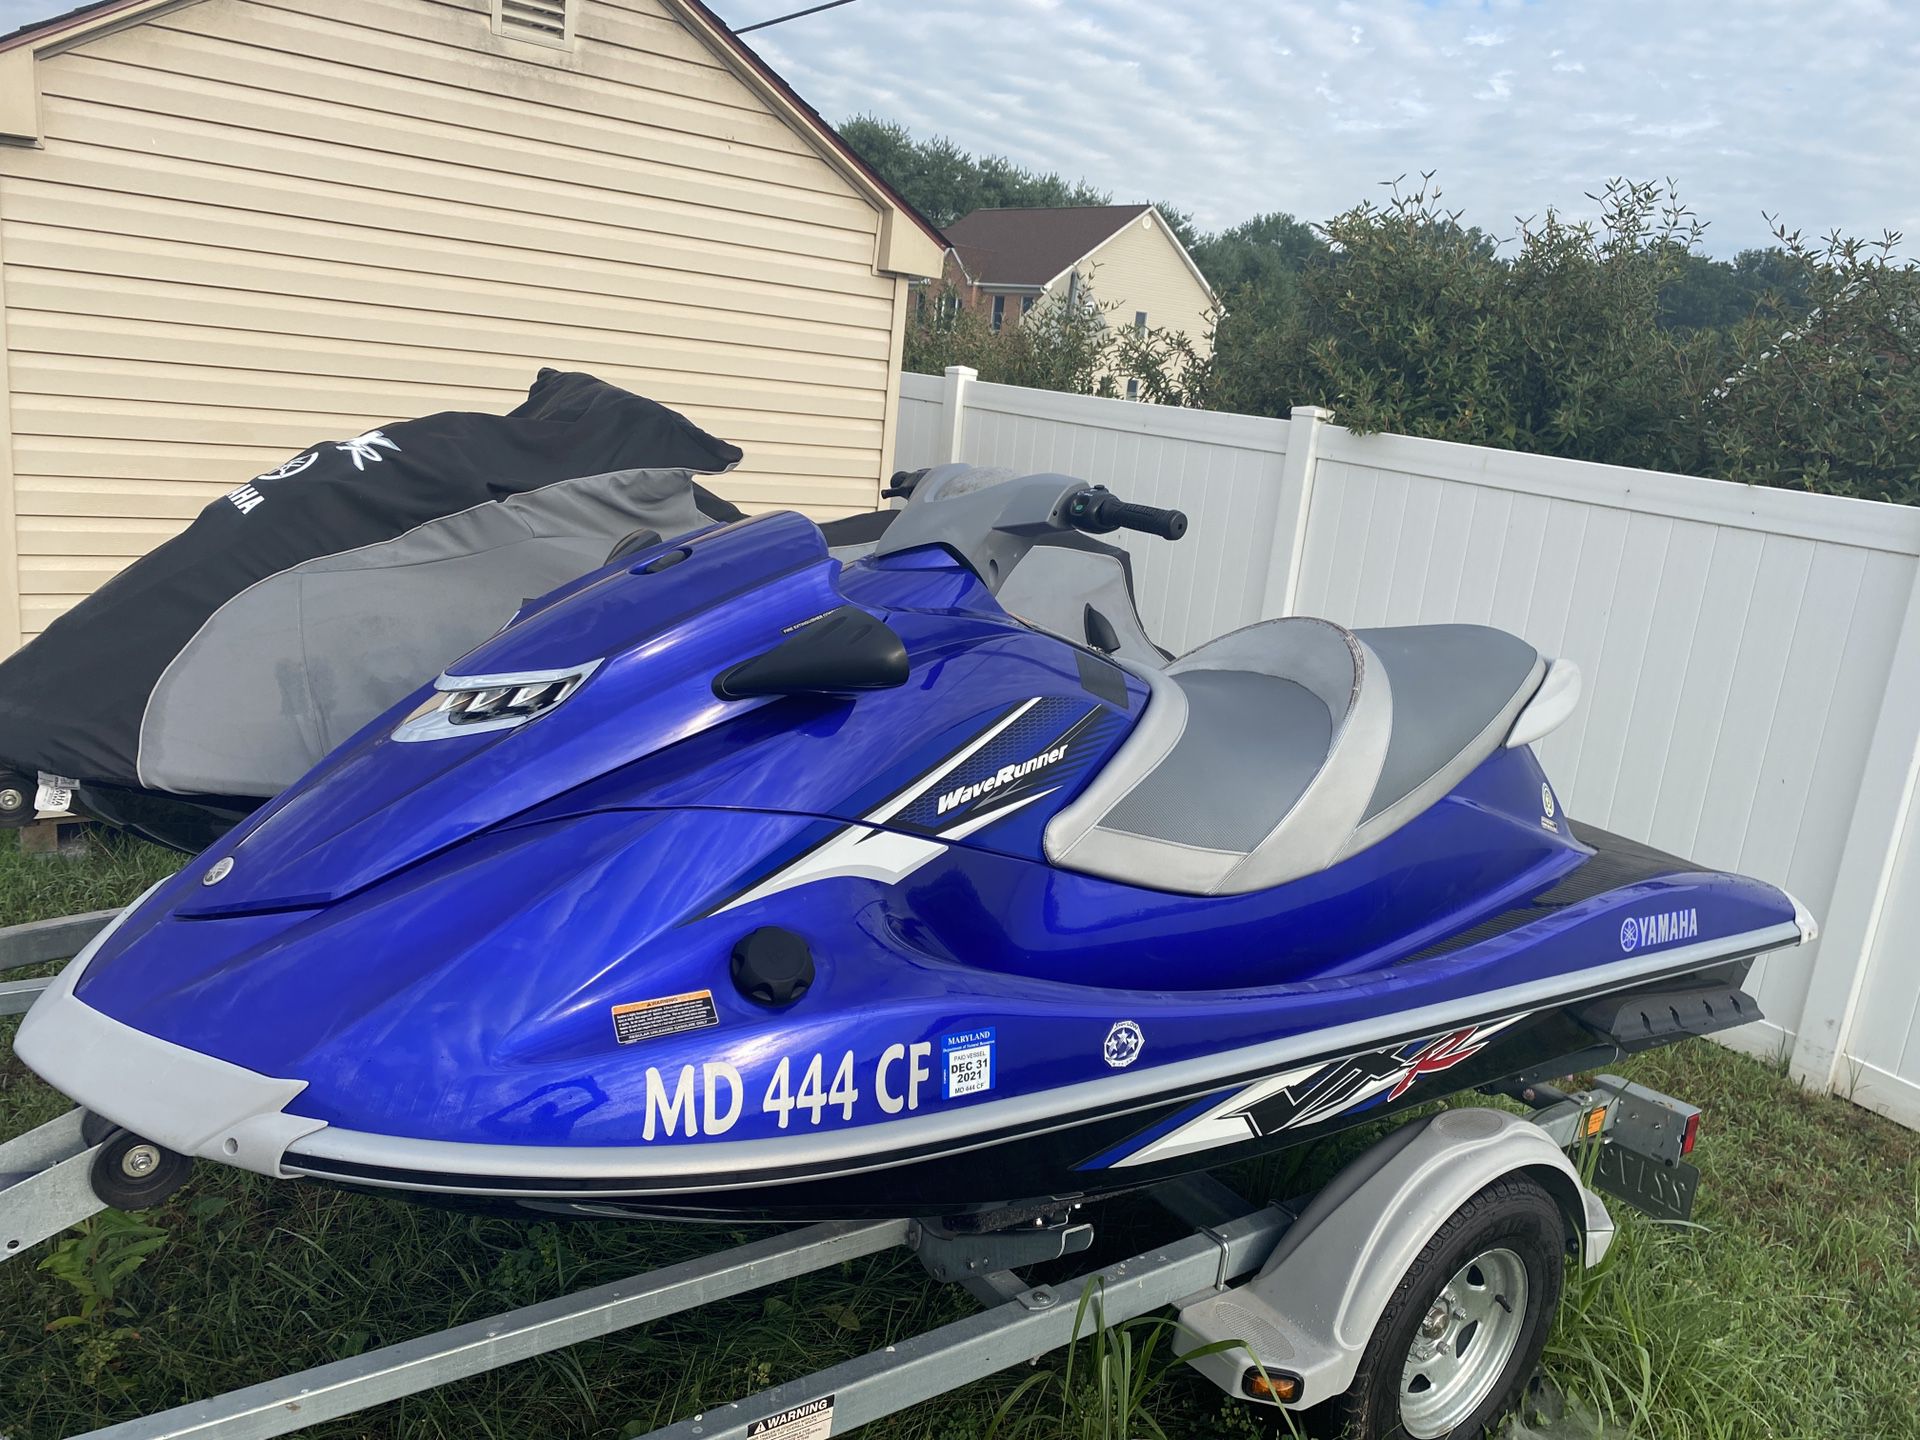 Two 2011 Yamaha VXR’s H.O. Jet Ski’s for Sale with Trailer